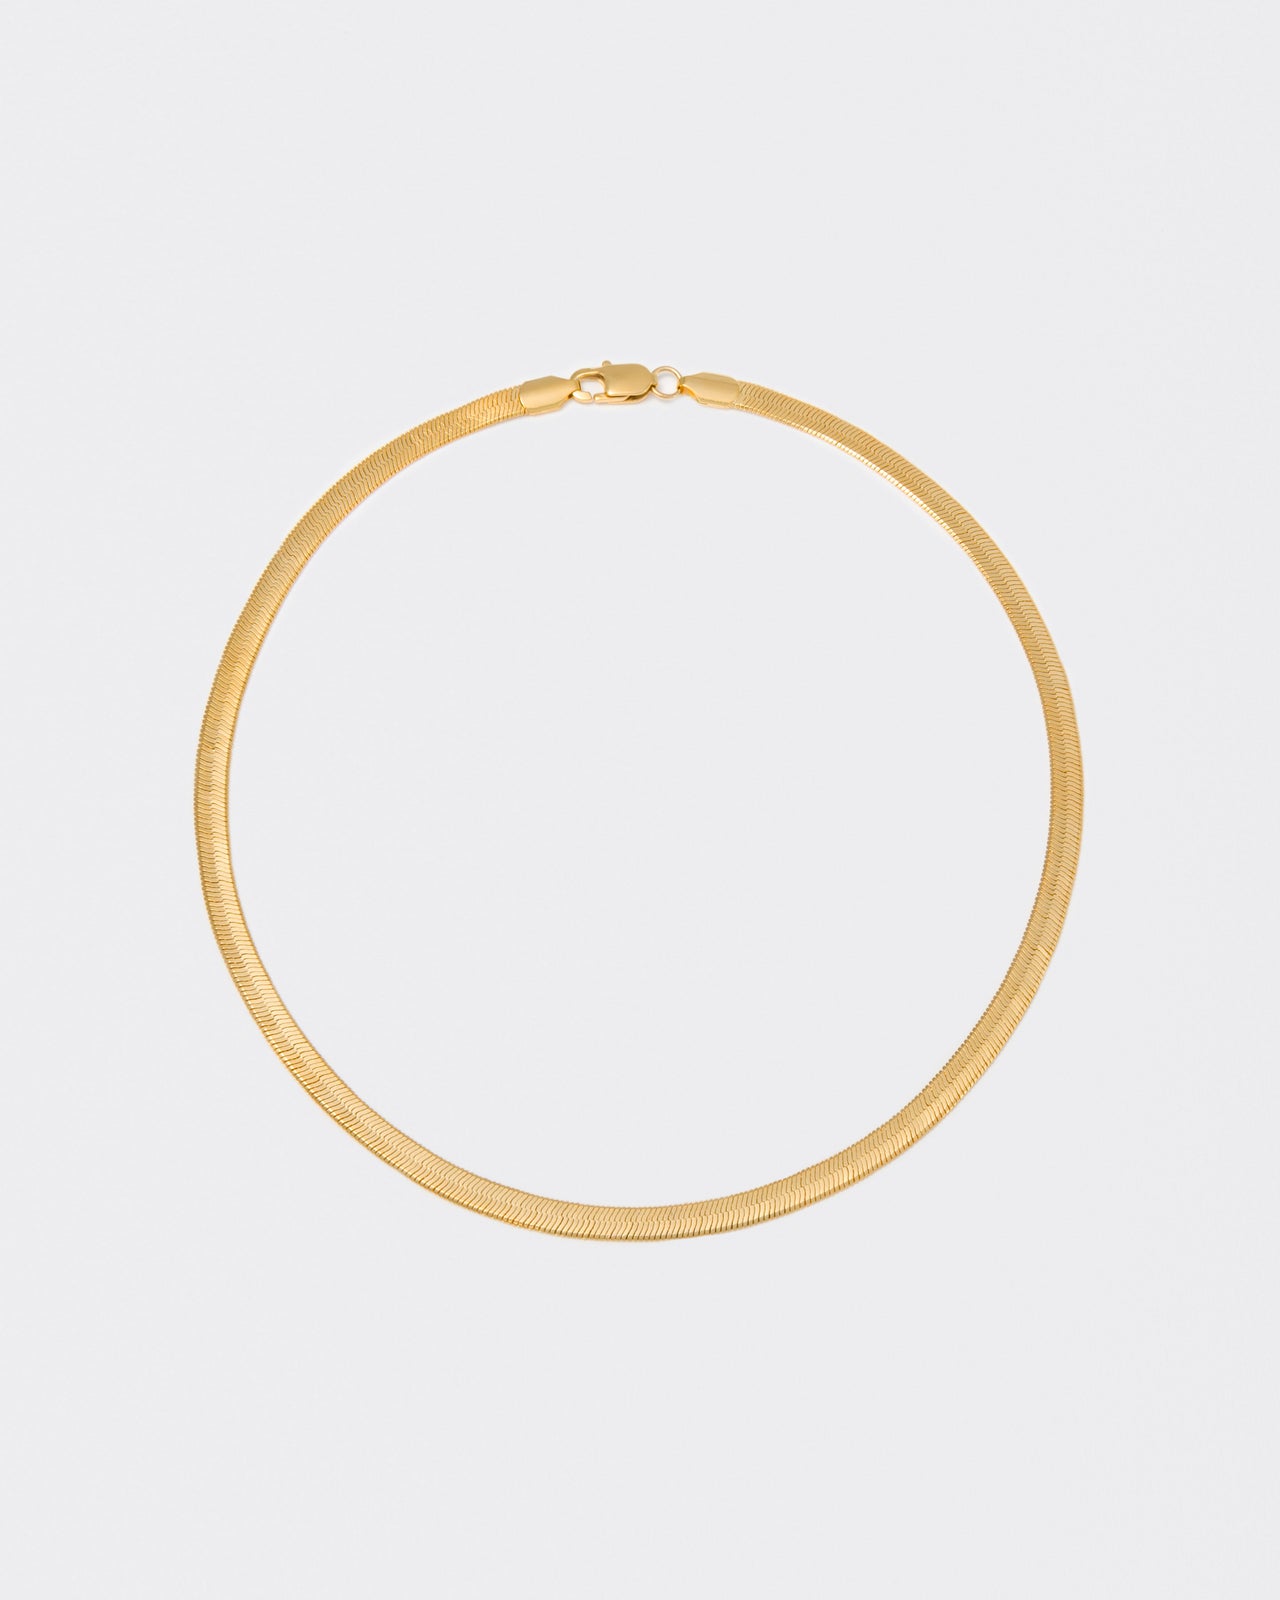 18k yellow gold coated herringbone chain necklace with lasered logo along the links and regular lobster clasp.